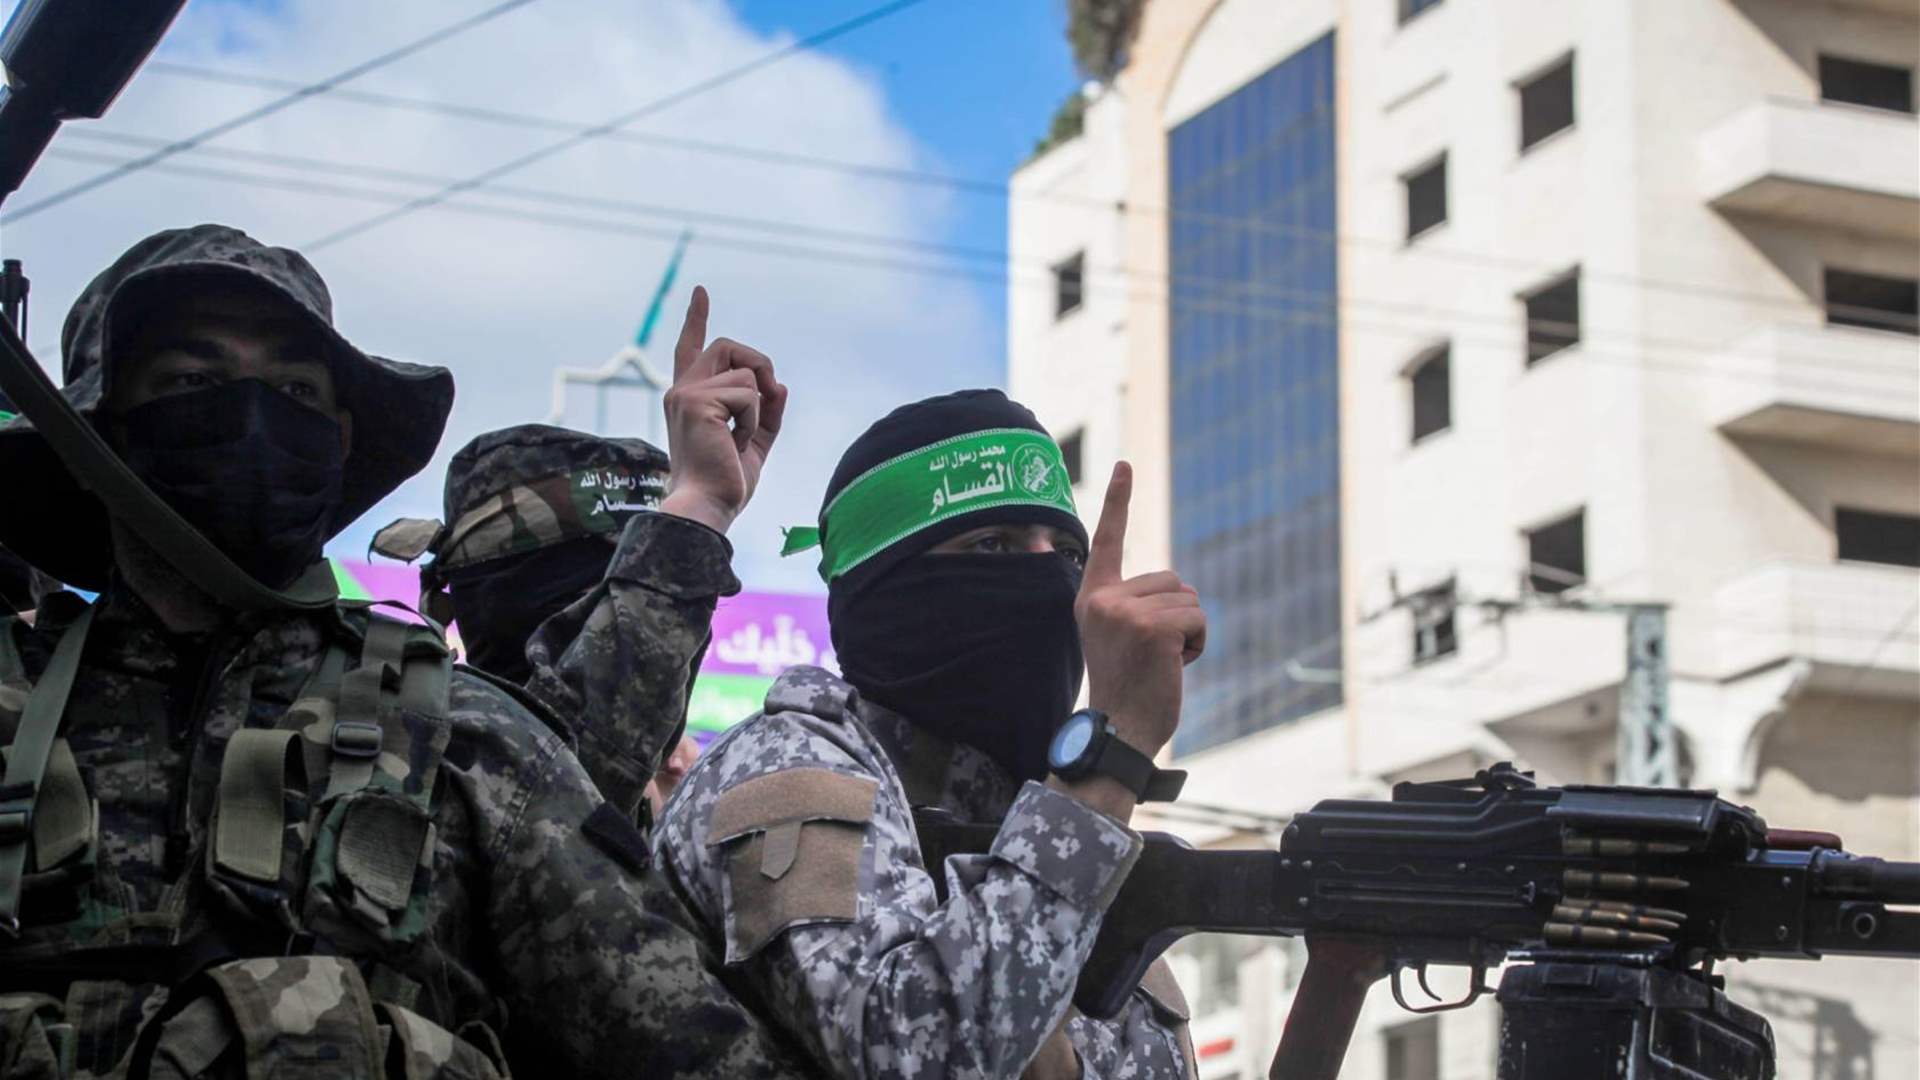 Hamas: We will consider releasing civilian hostages when conditions are suitable